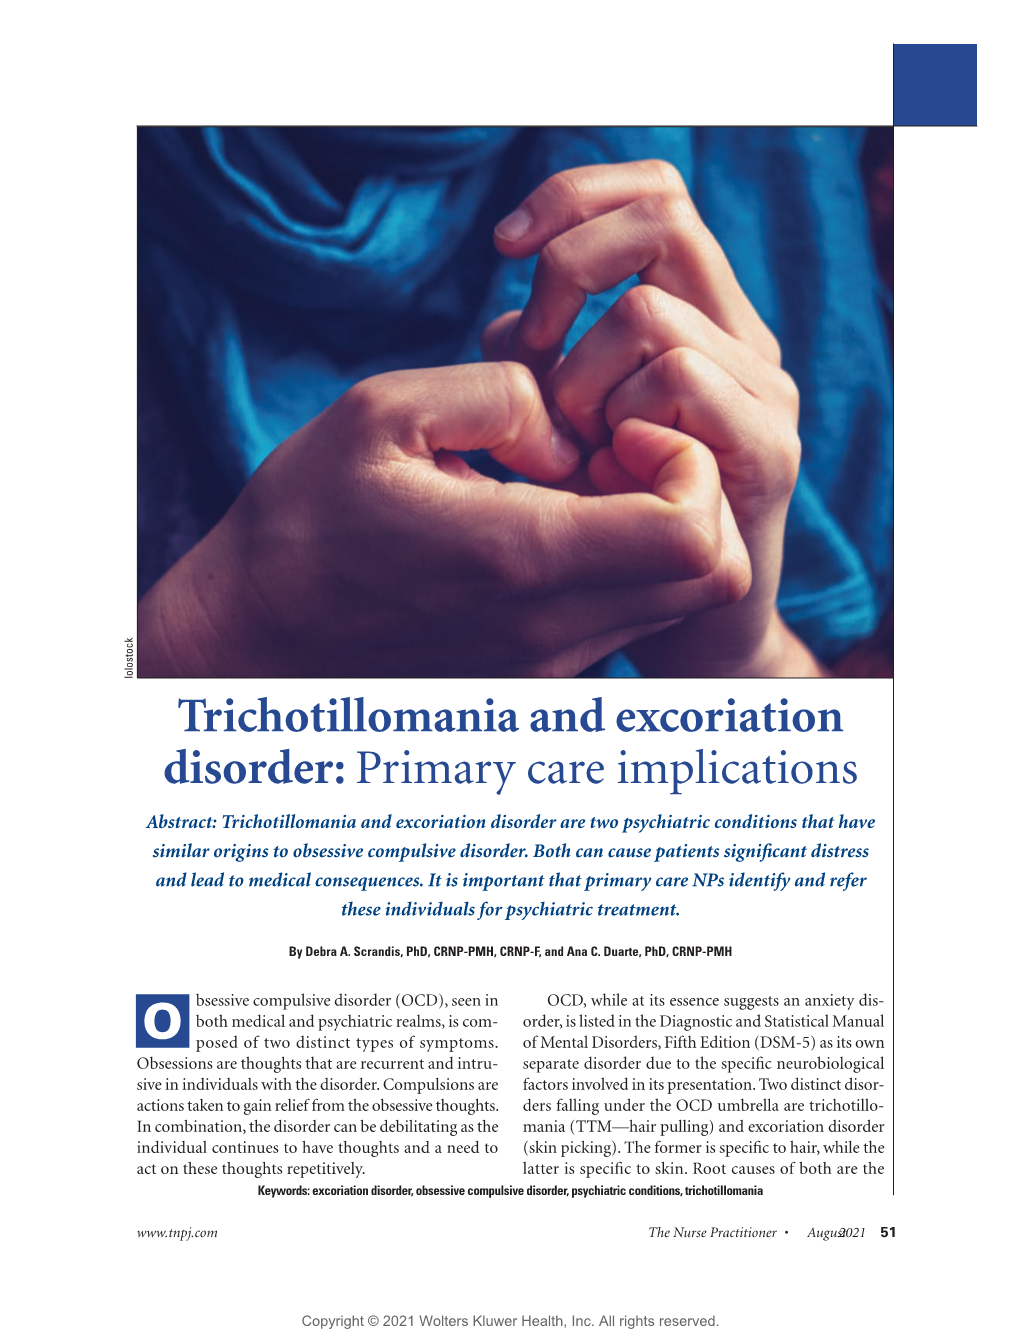 O Trichotillomania and Excoriation Disorder: Primary Care Implications